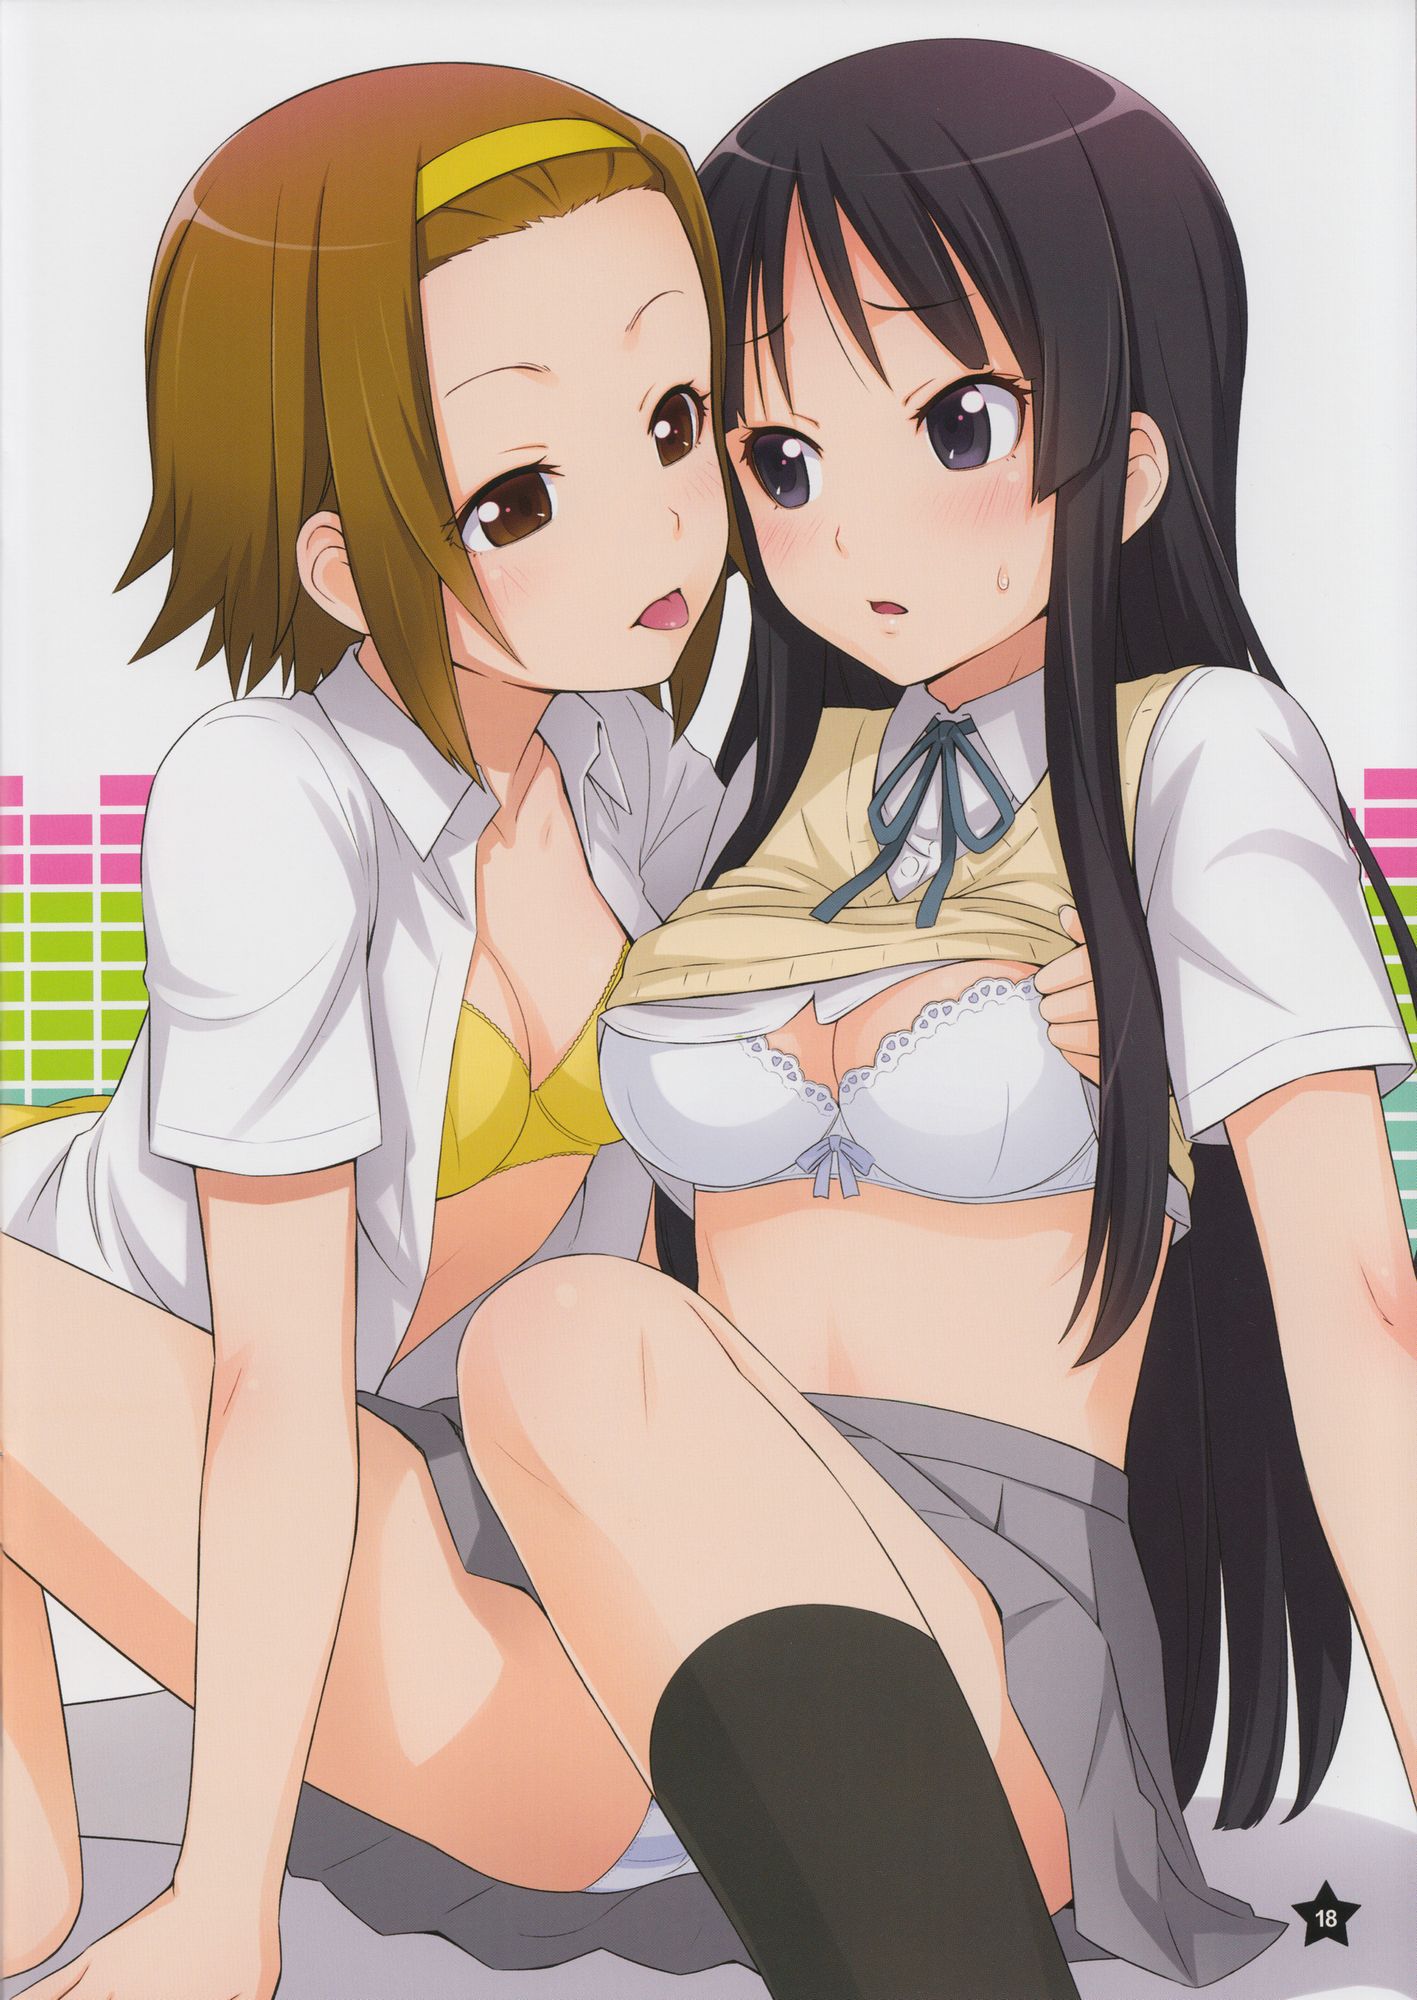 [2nd] The second erotic image that has been entwined violently between beautiful girl 34 [yuri/lesbian] 20